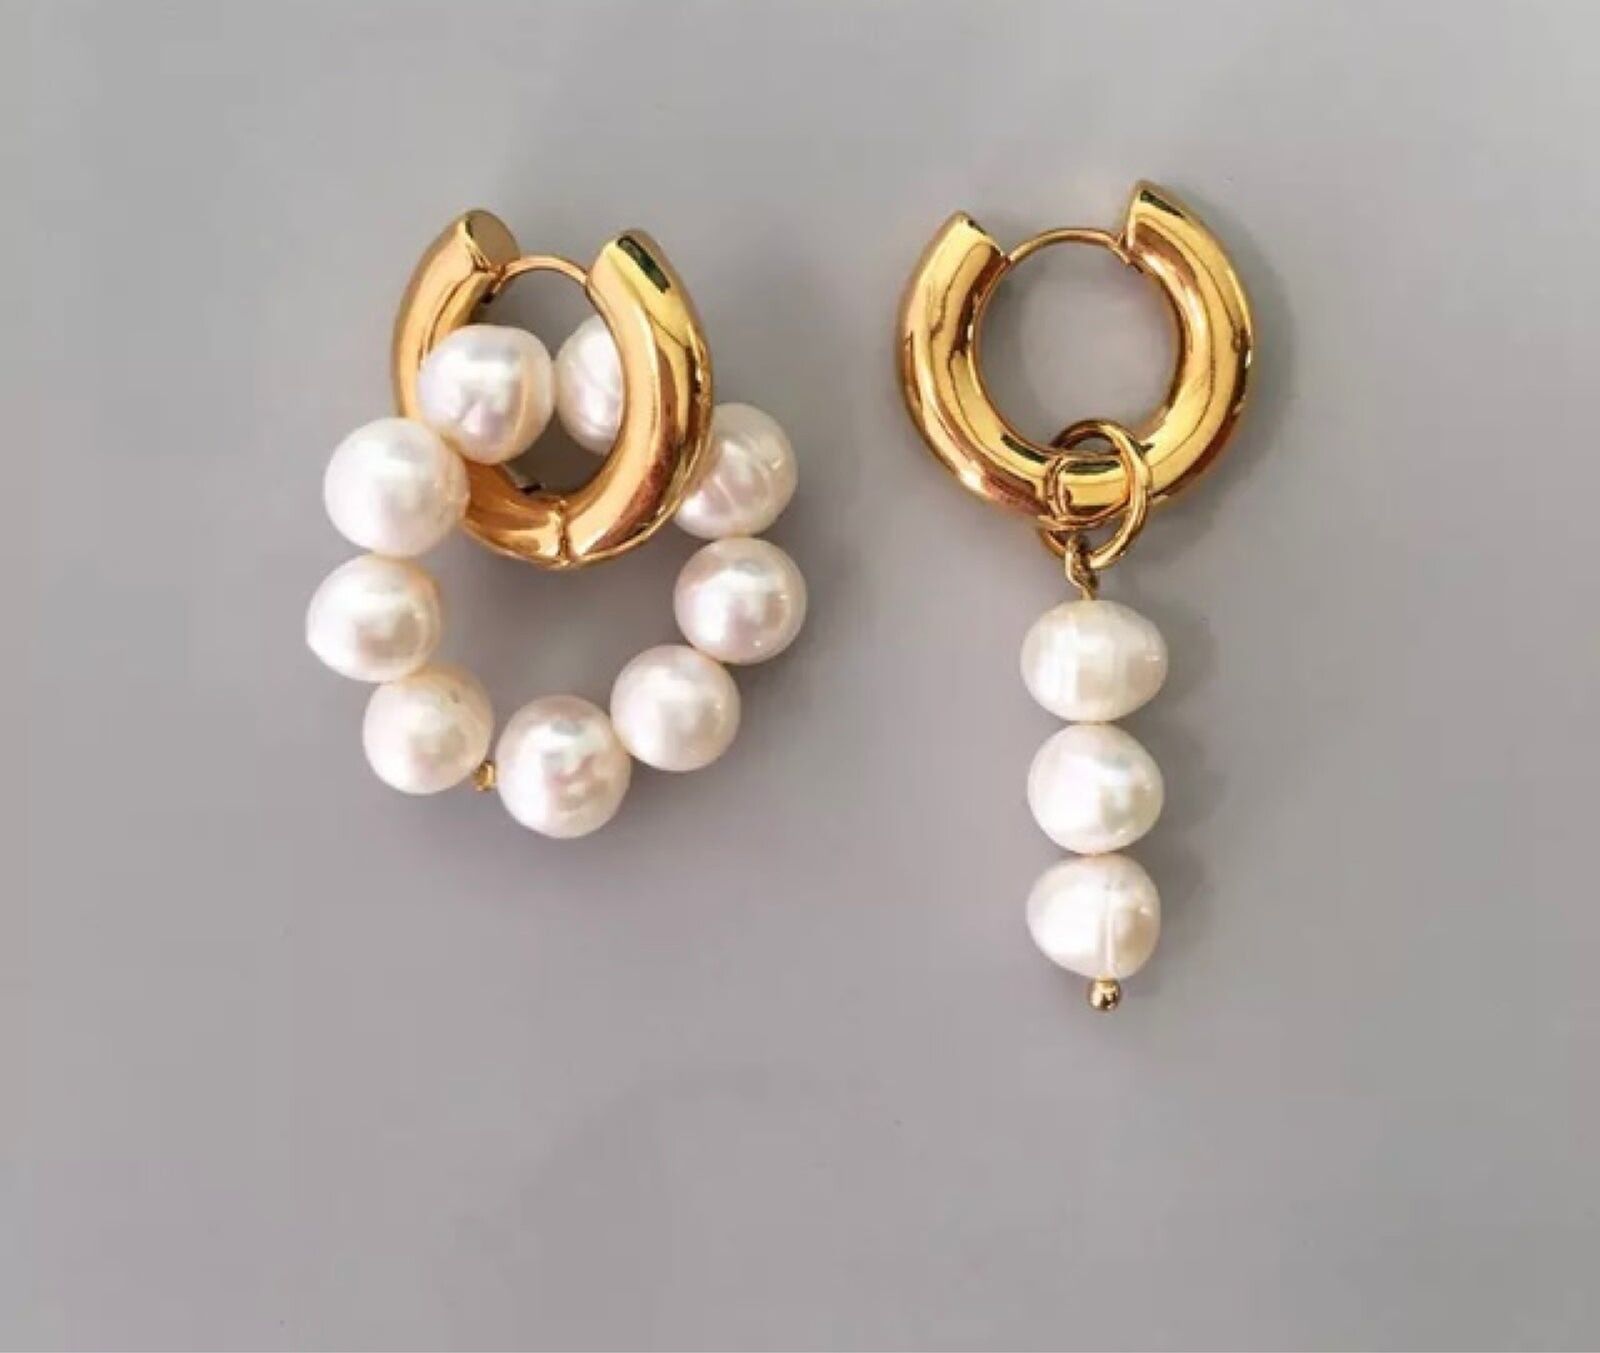 Punk Metal Stainless Golden Round Earclip Earrings For Women Fashion Vintage sty - £9.90 GBP